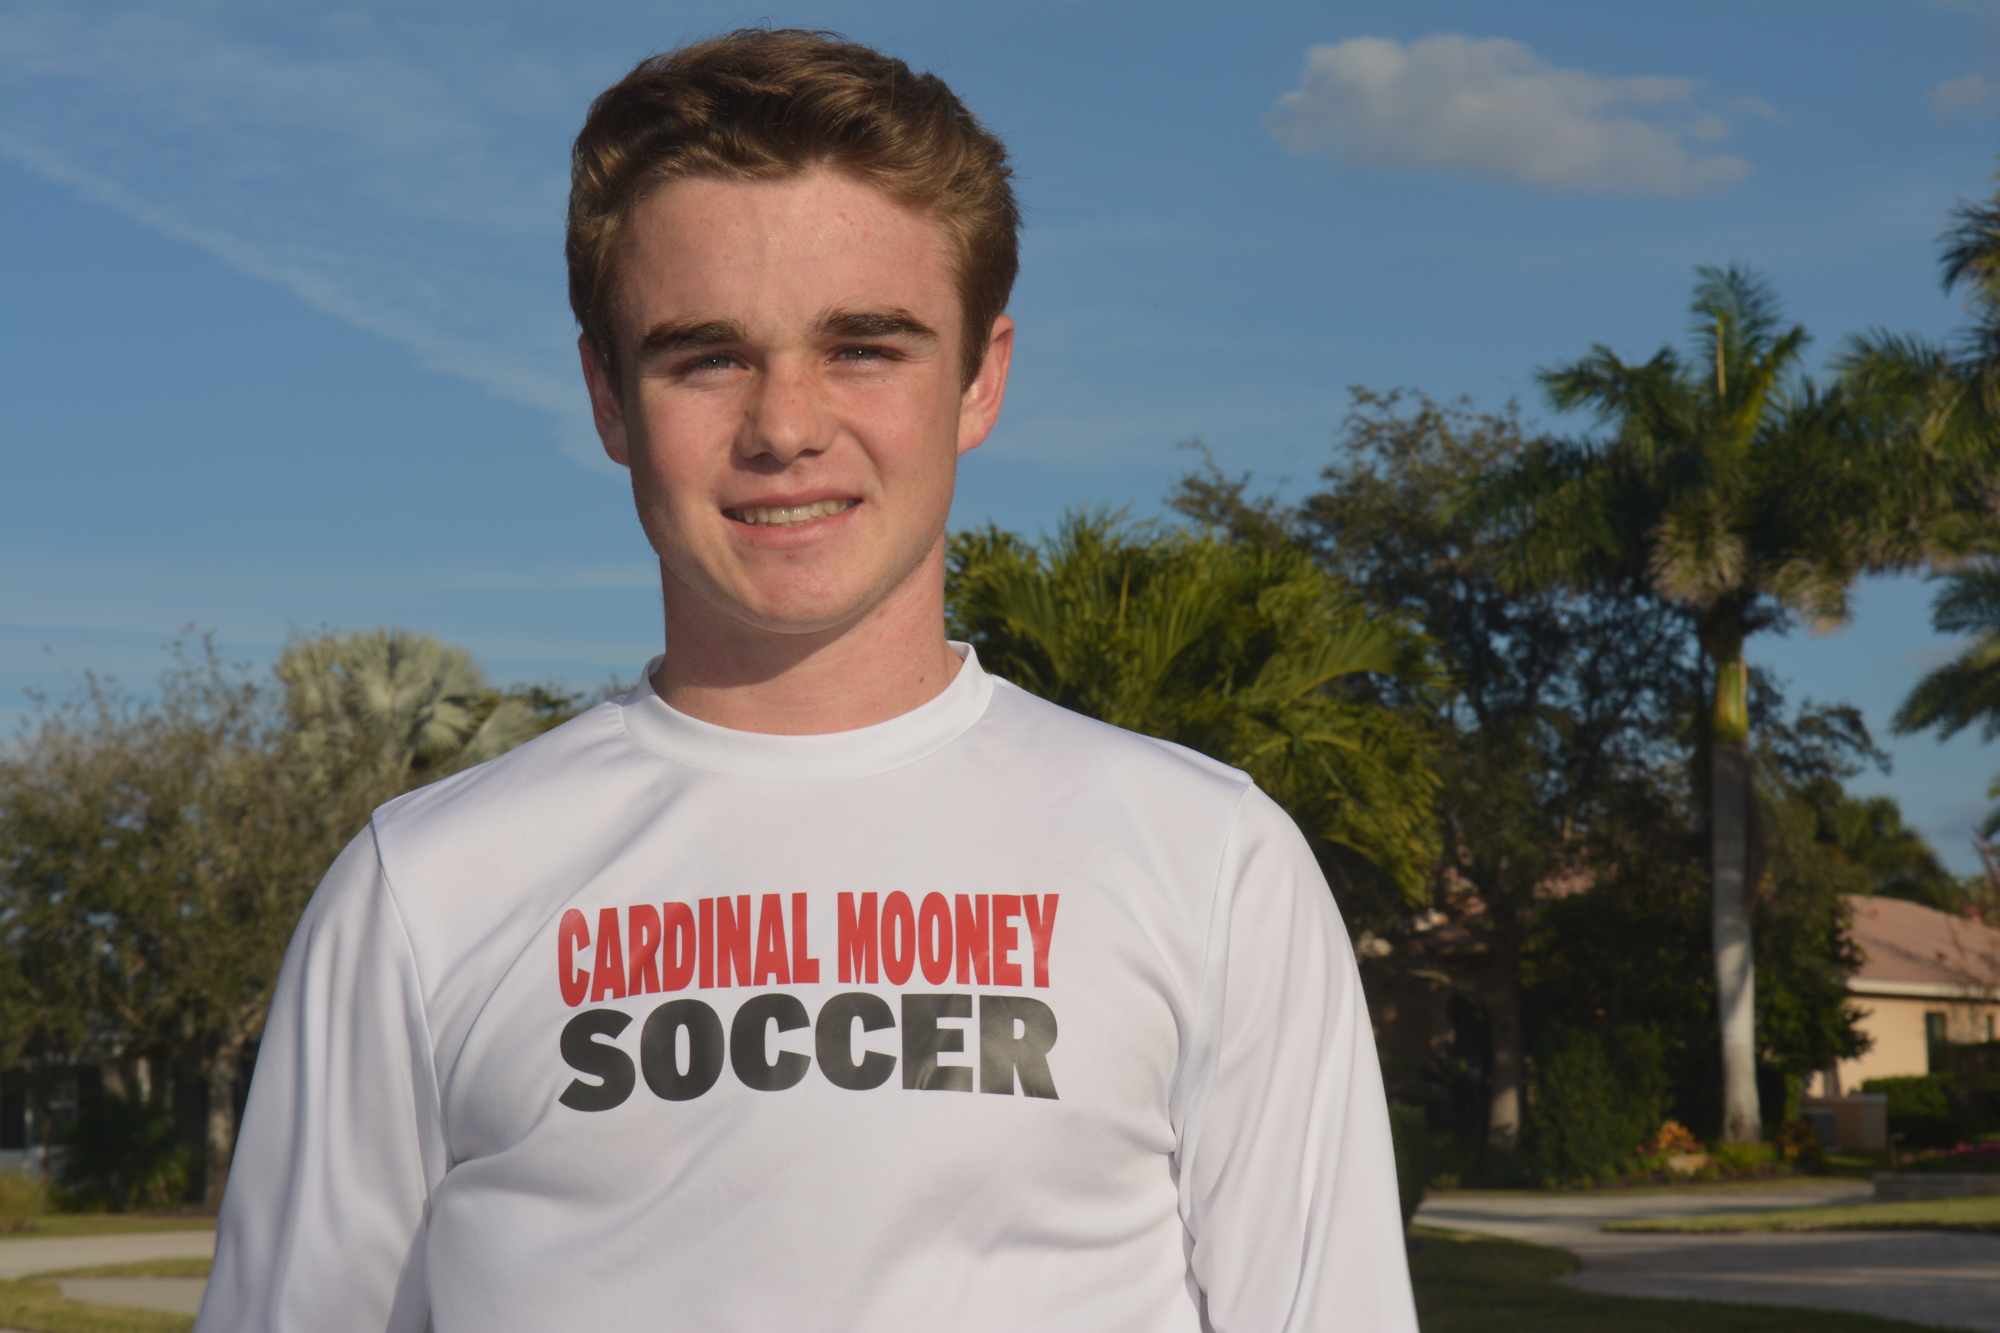 Cardinal Mooney senior Connor Nicholson currently plays for three sports teams, and captains all three.